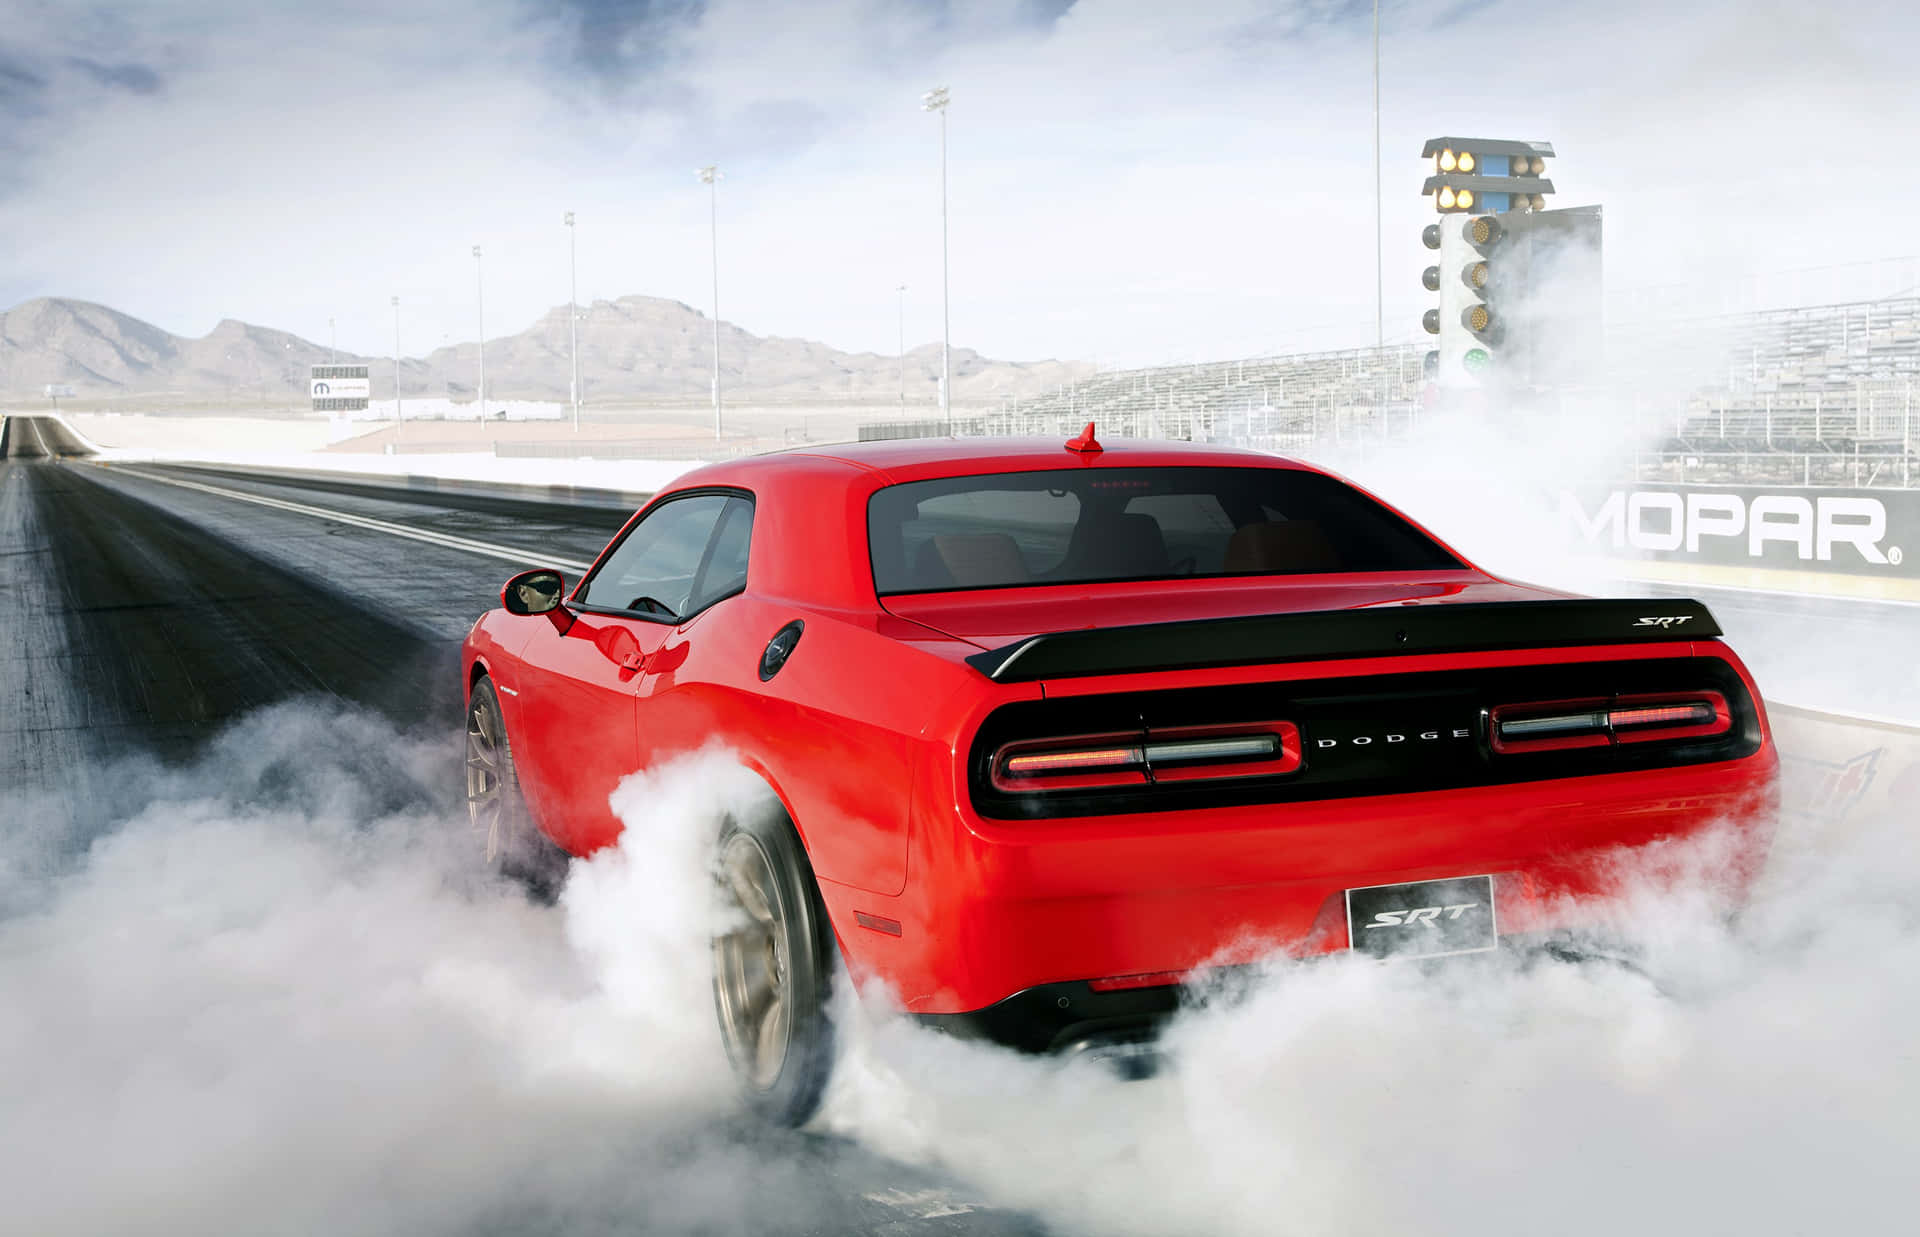 Power and Performance - The Dodge Hellcat Wallpaper